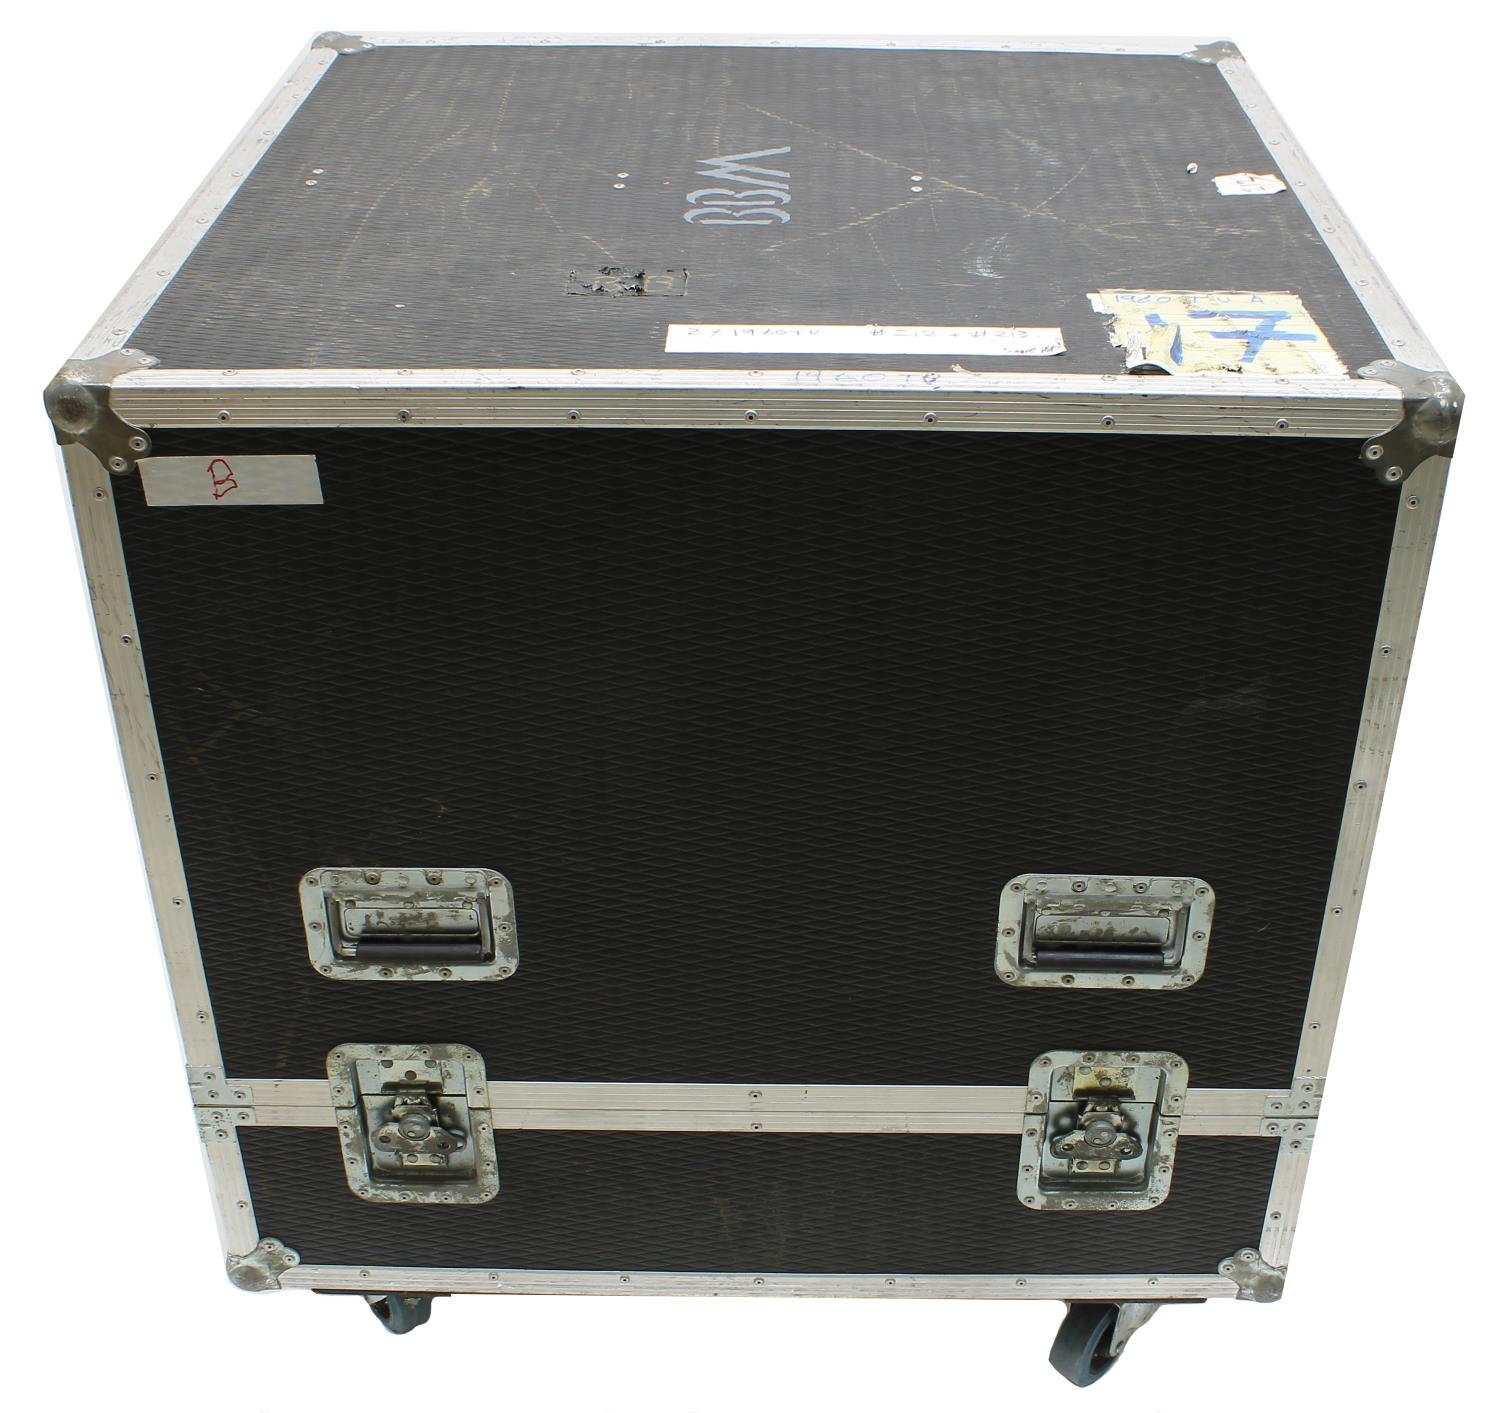 Gary Moore - large flight case on wheels bearing 'BBM' stencils, and various tape annotations, 39" - Image 2 of 3